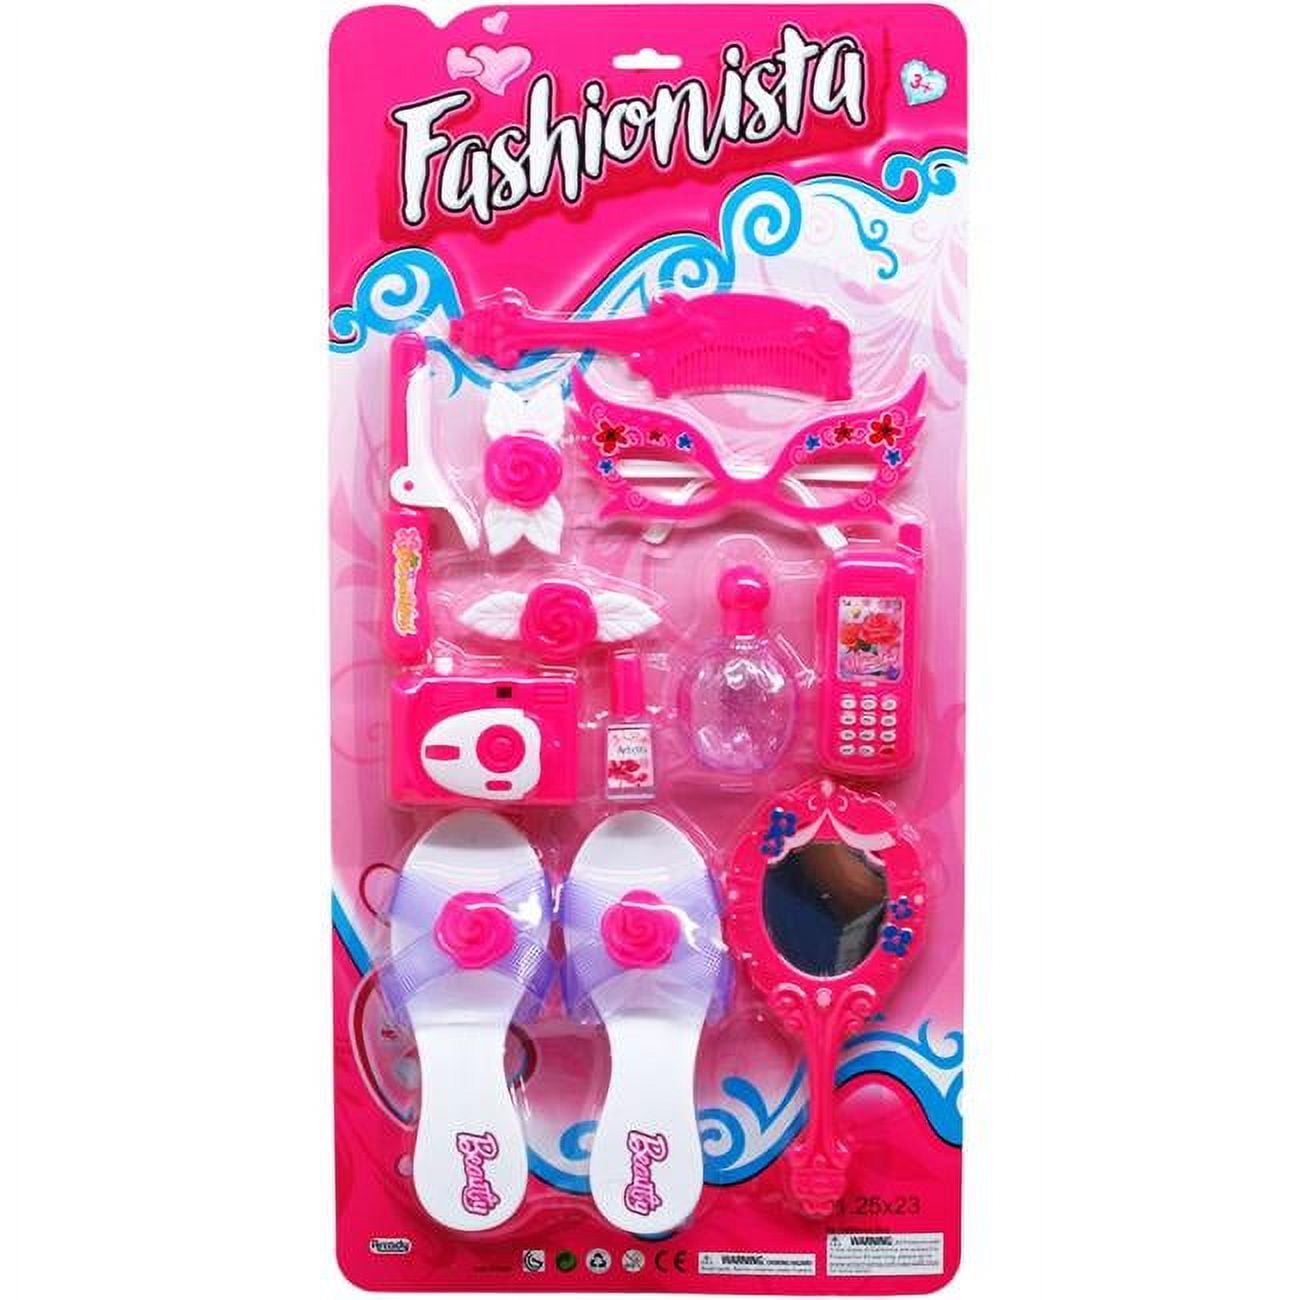 Picture of DDI 2340872 Fashionista Beauty 12 Piece Play Set - Assorted Styles Case of 12